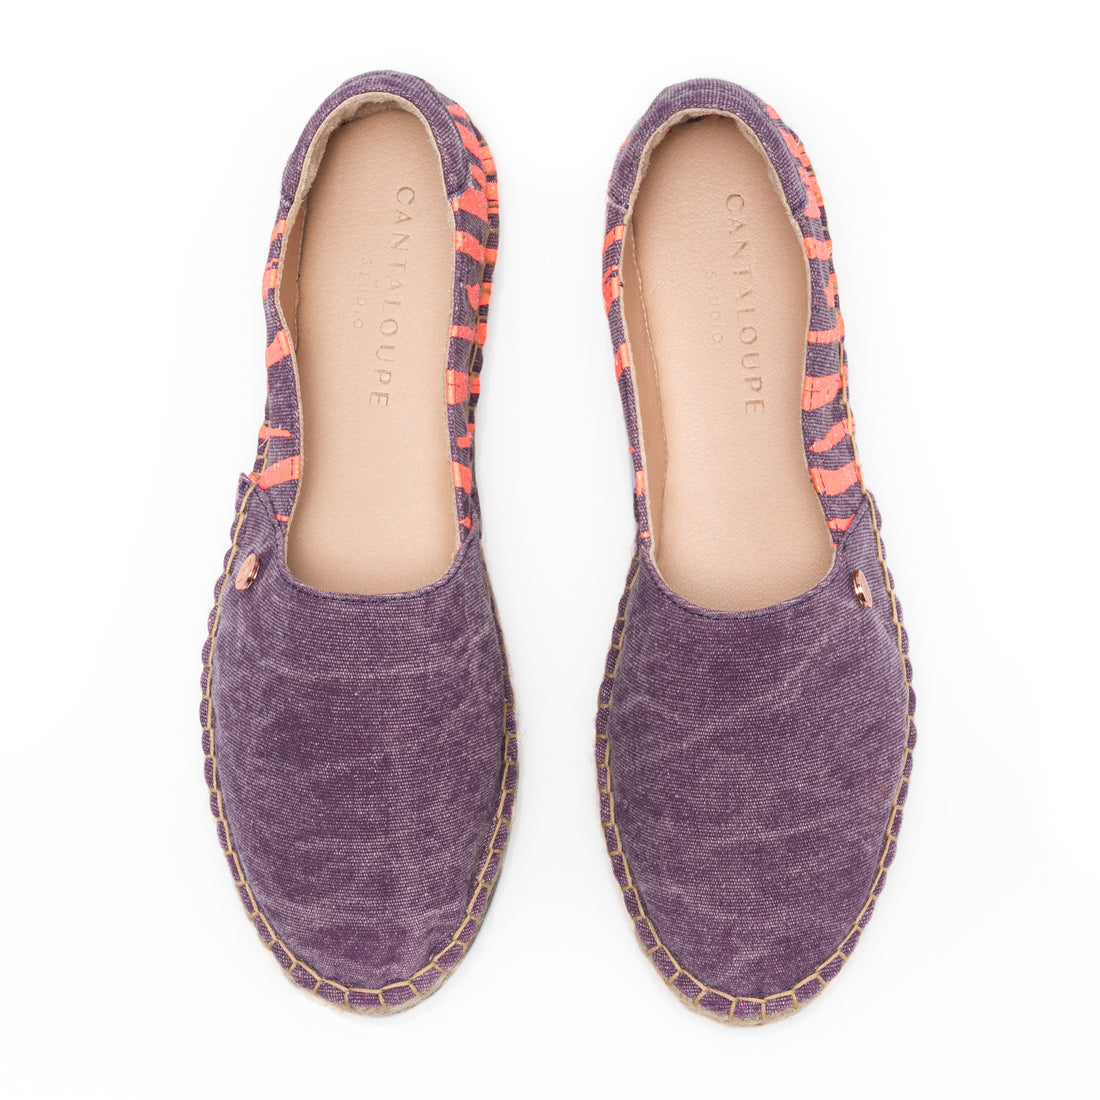 Premium Stamped Espadrilles | You are the Artist and the Art | WATERCOLOR | PURPLE ZEBRA